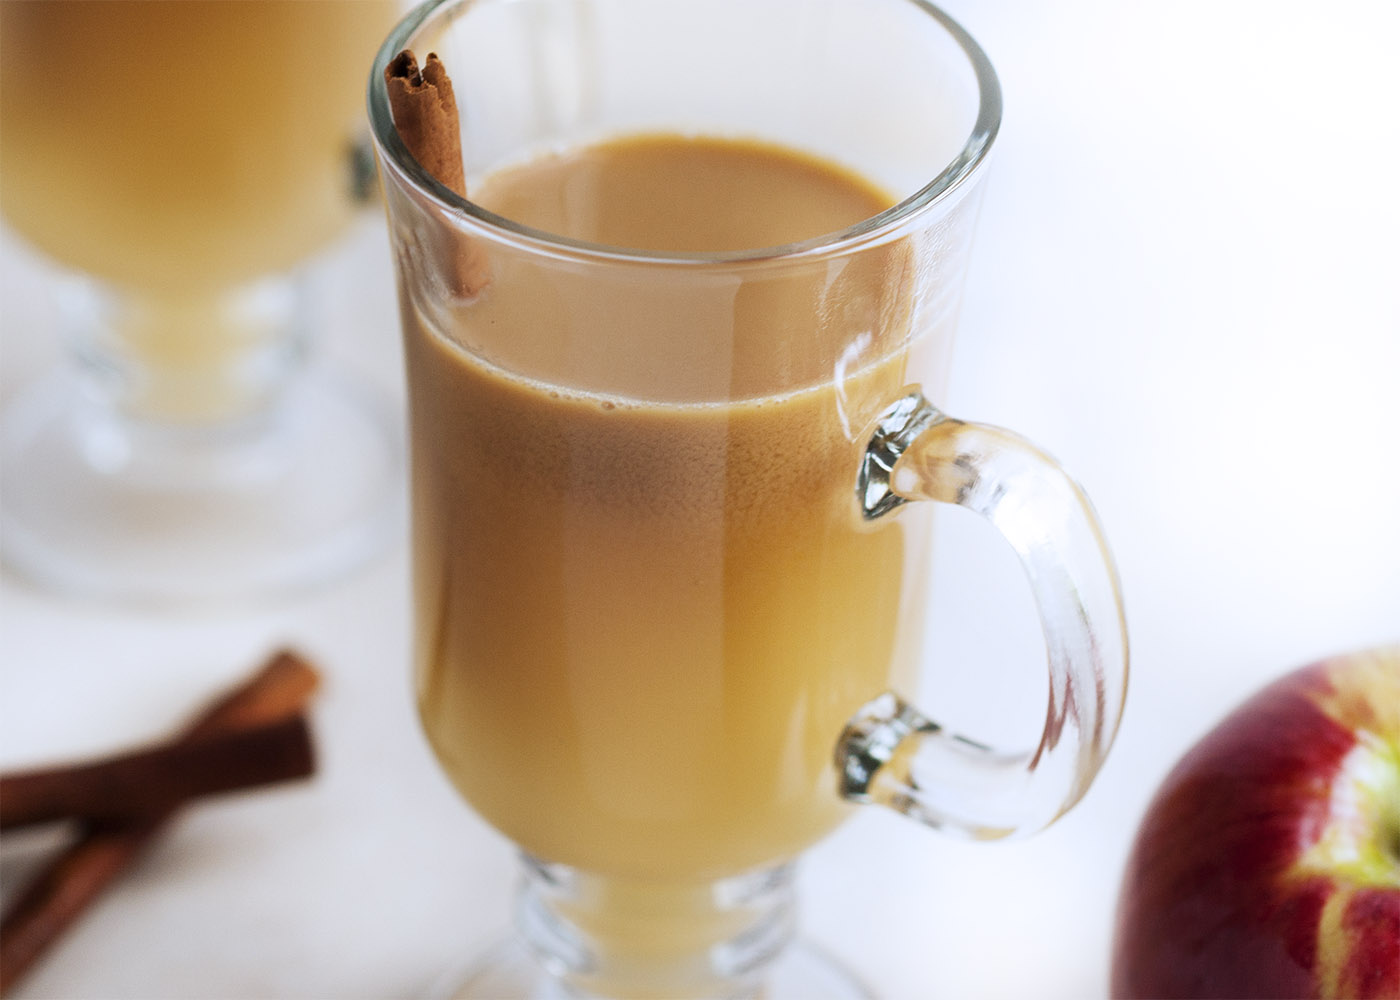 Hot Apple Pie Bourbon Cocktail - This twist on hot buttered bourbon uses cider and butterscotch sauce to make the perfect thanksgiving or fall cocktail. | justalittlebitofbacon.com